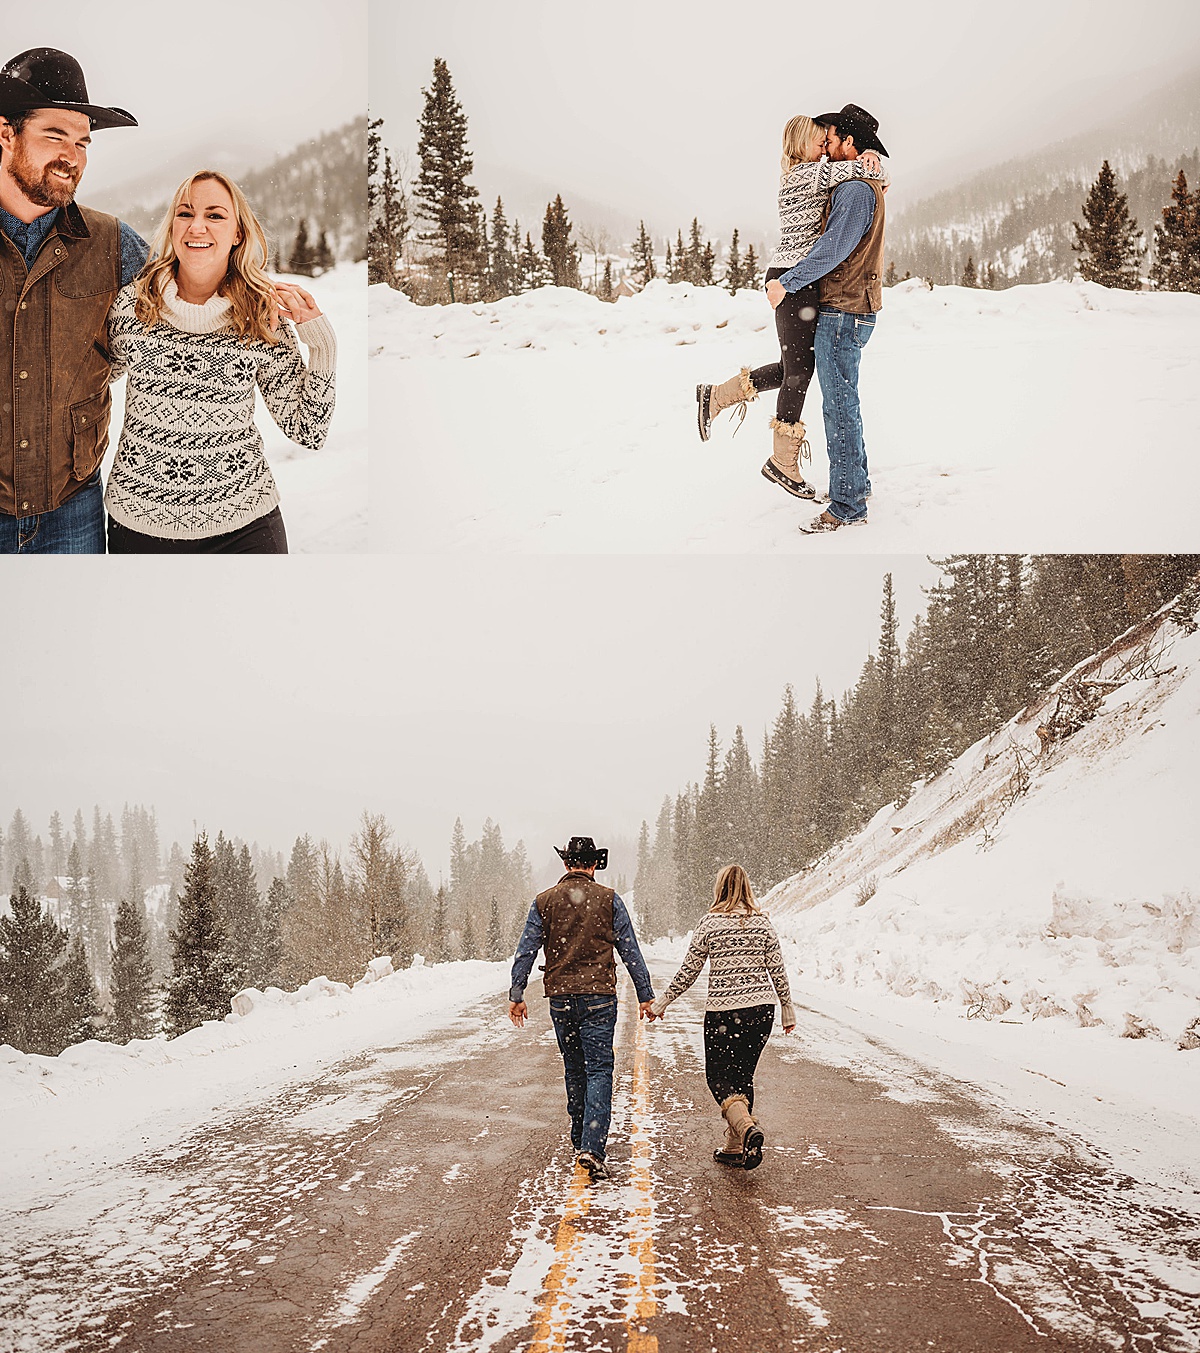 newly engaged couple wander snowy mountain for romantic photo shoot by Three Feather Photo Co